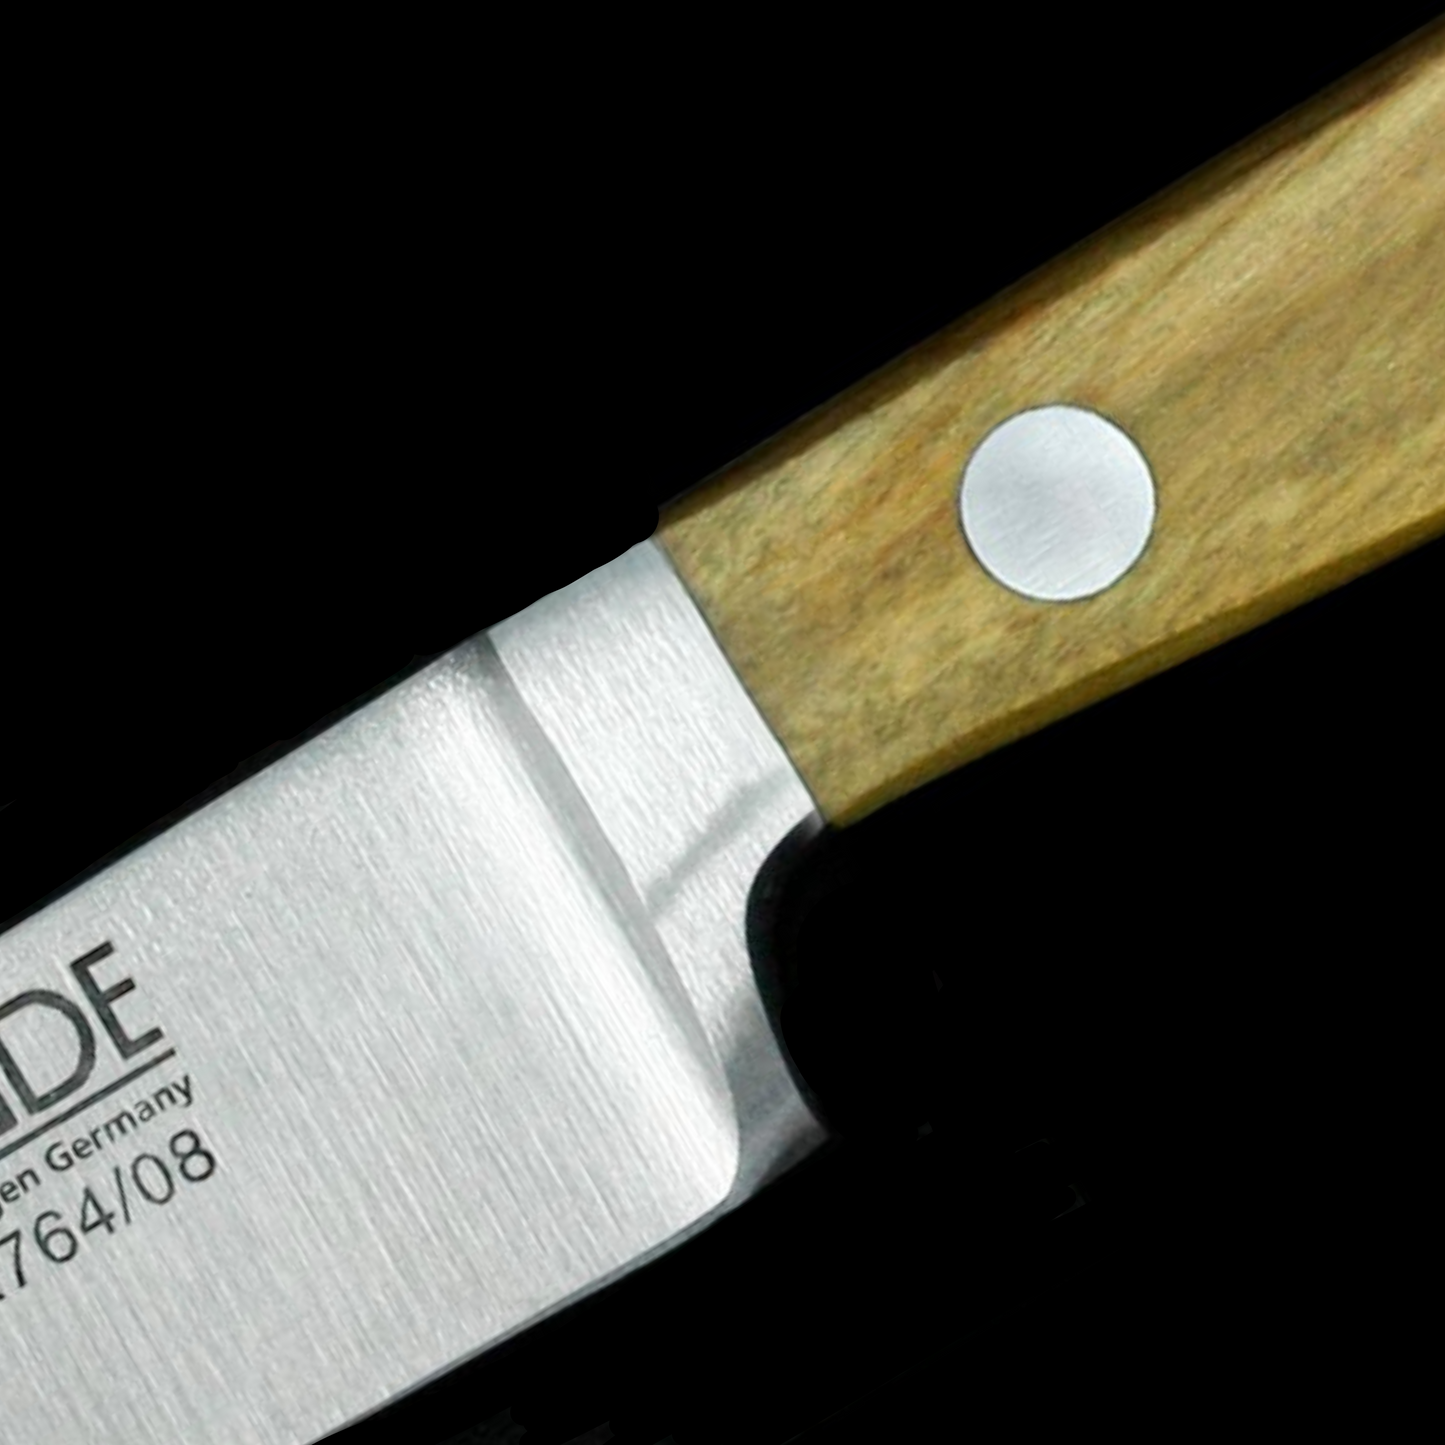 Gude Alpha Olive Series Forged Double Bolster Chef's Paring Knife 3", Olivewood Handle - GuedeUSA